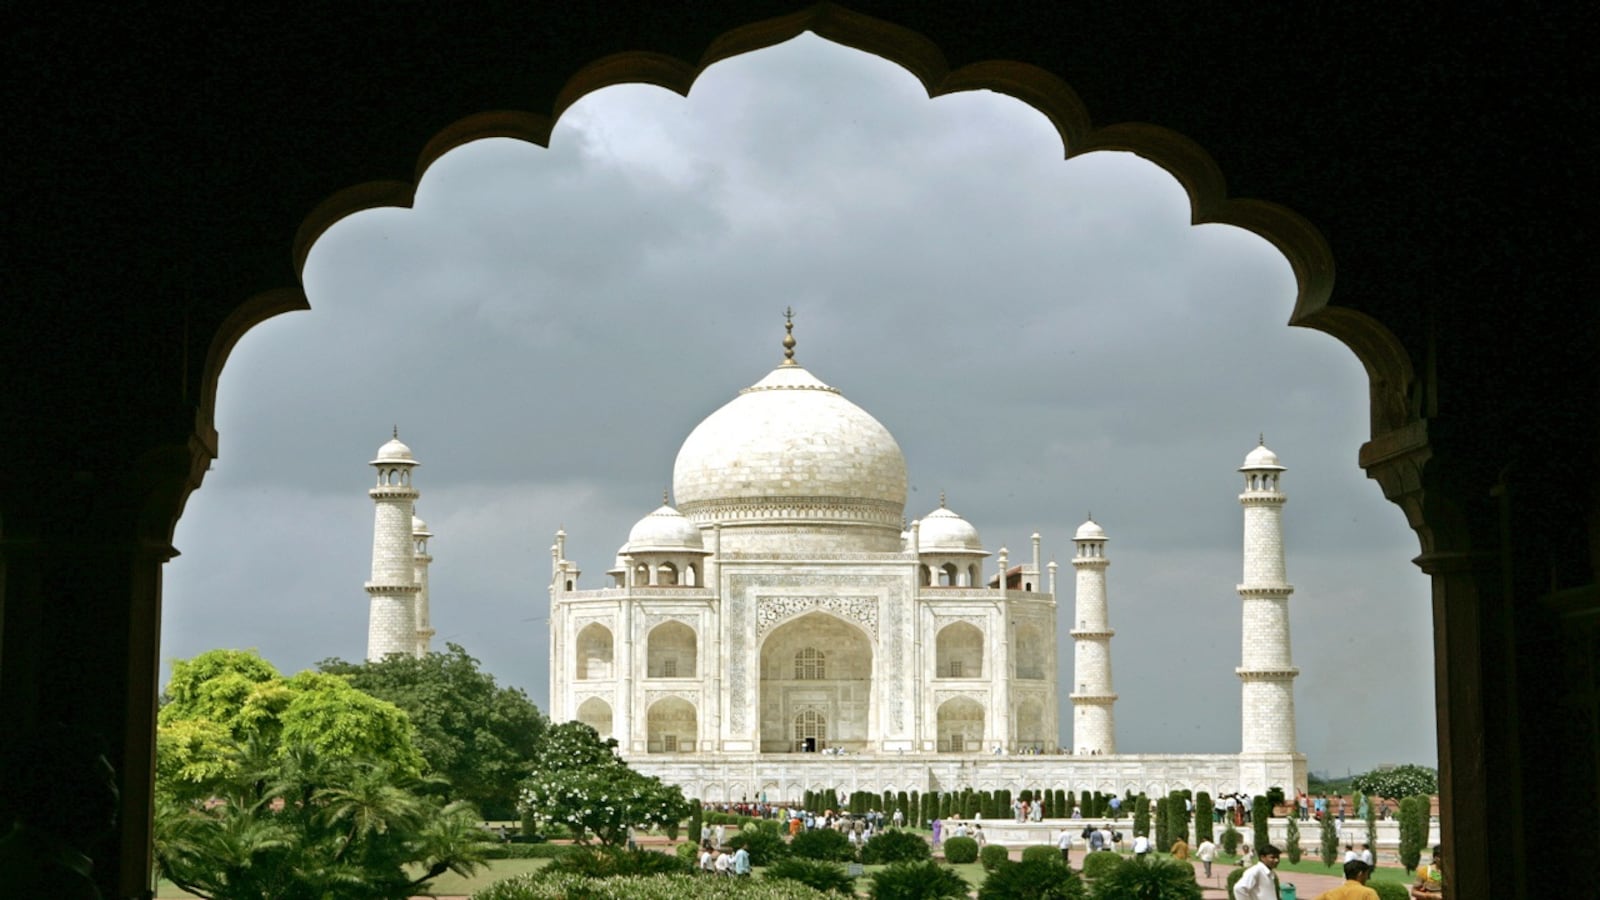 Taj Mahal, Agra Fort to reopen for public from September 21